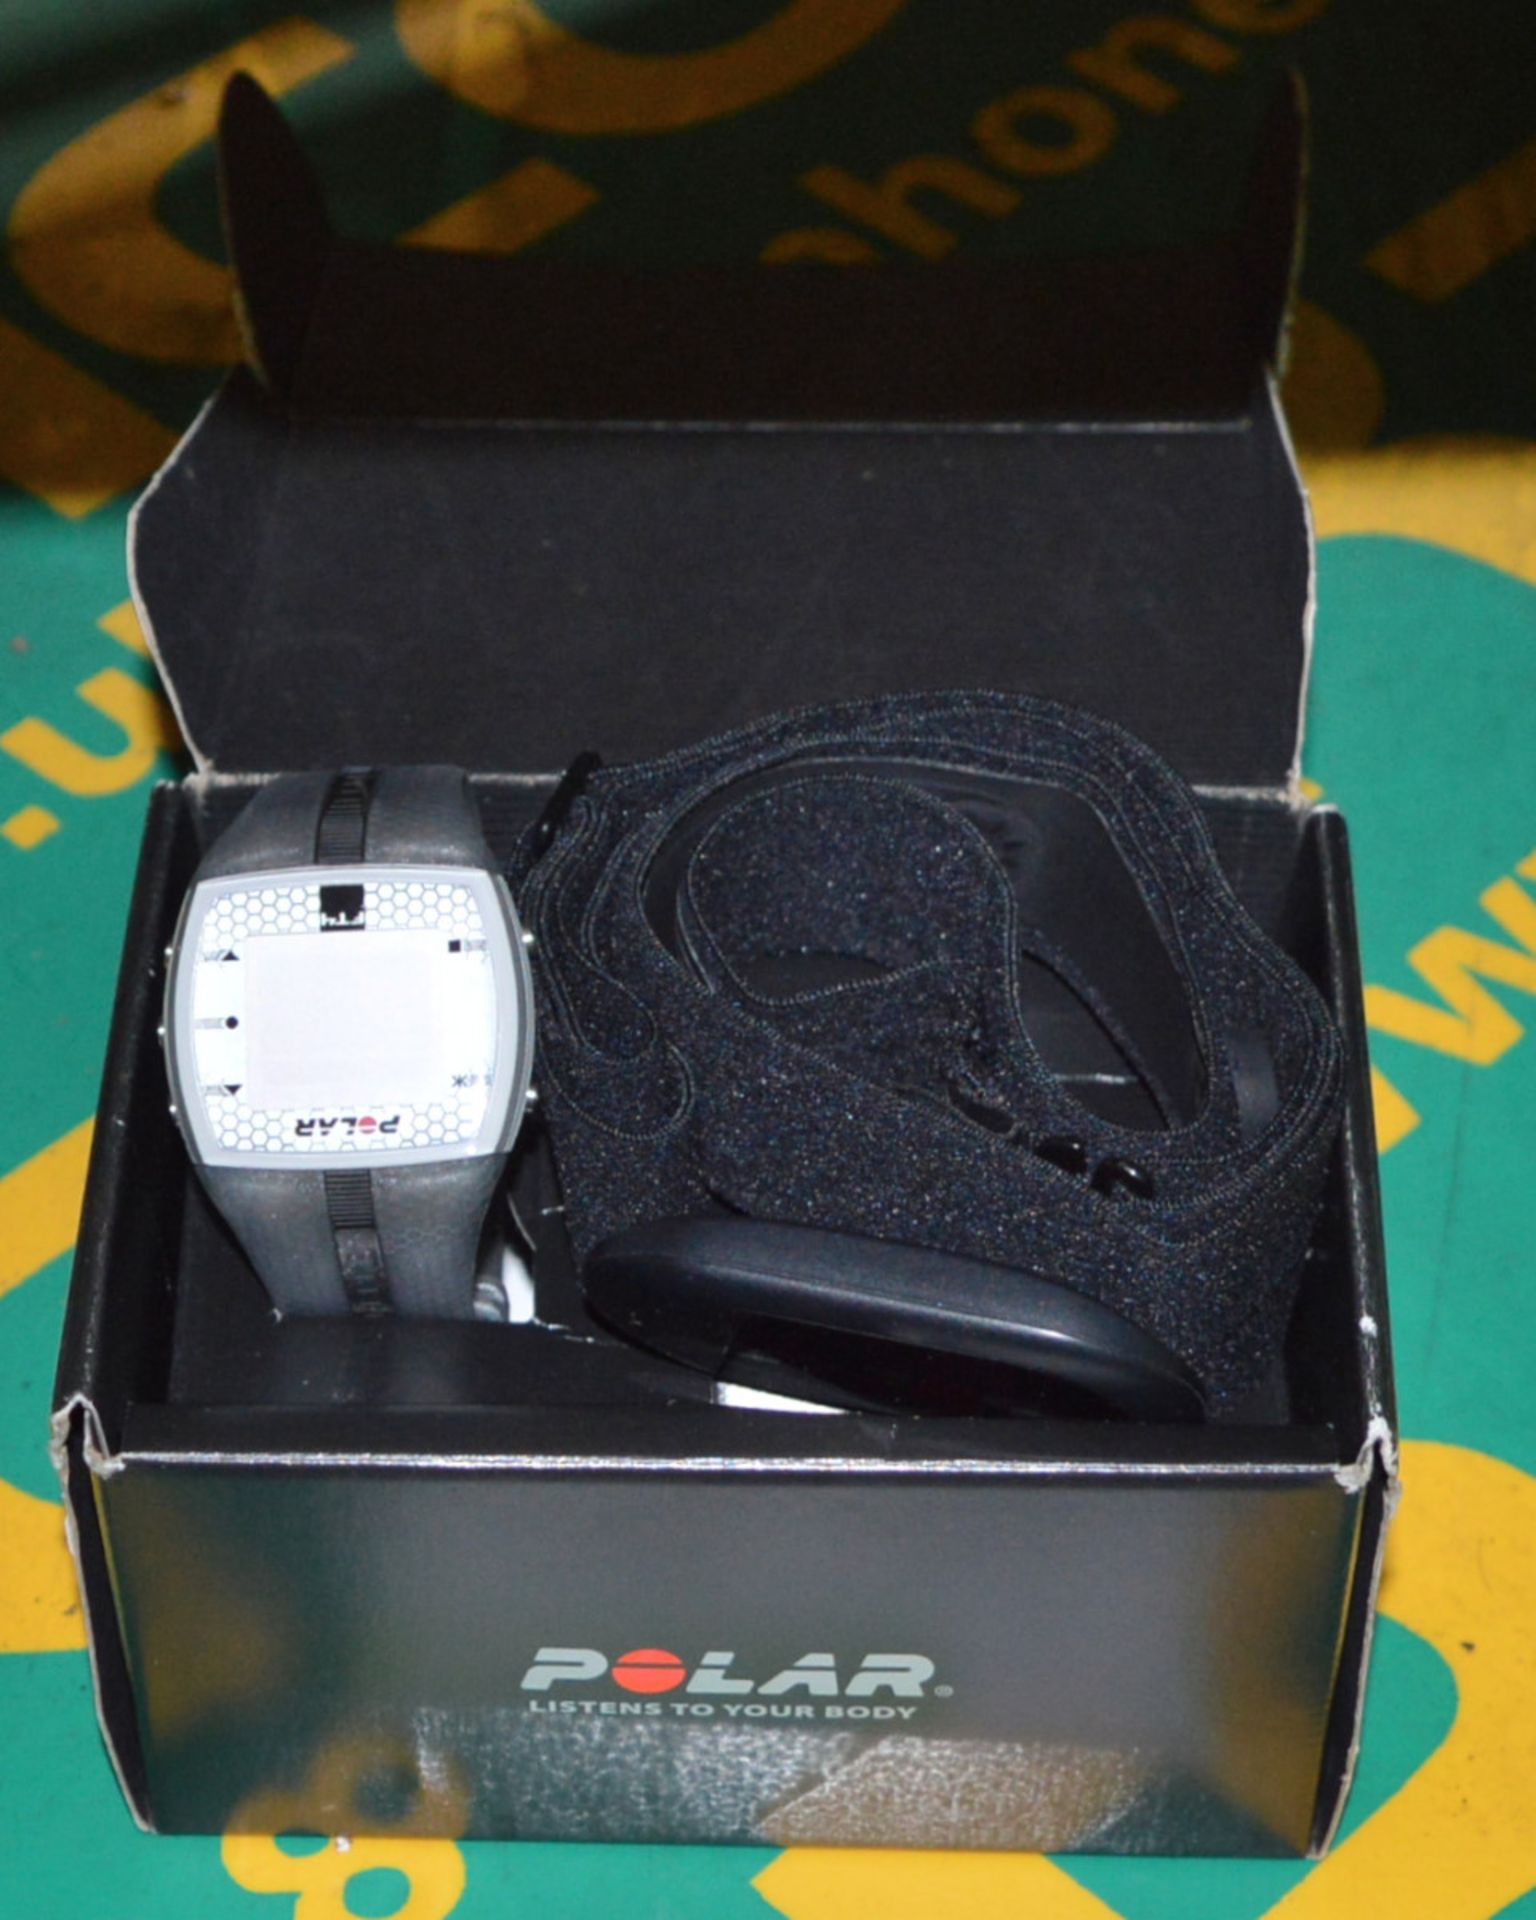 Polar FT4M Heart Rate Monitor & Sports Watch - Image 2 of 2